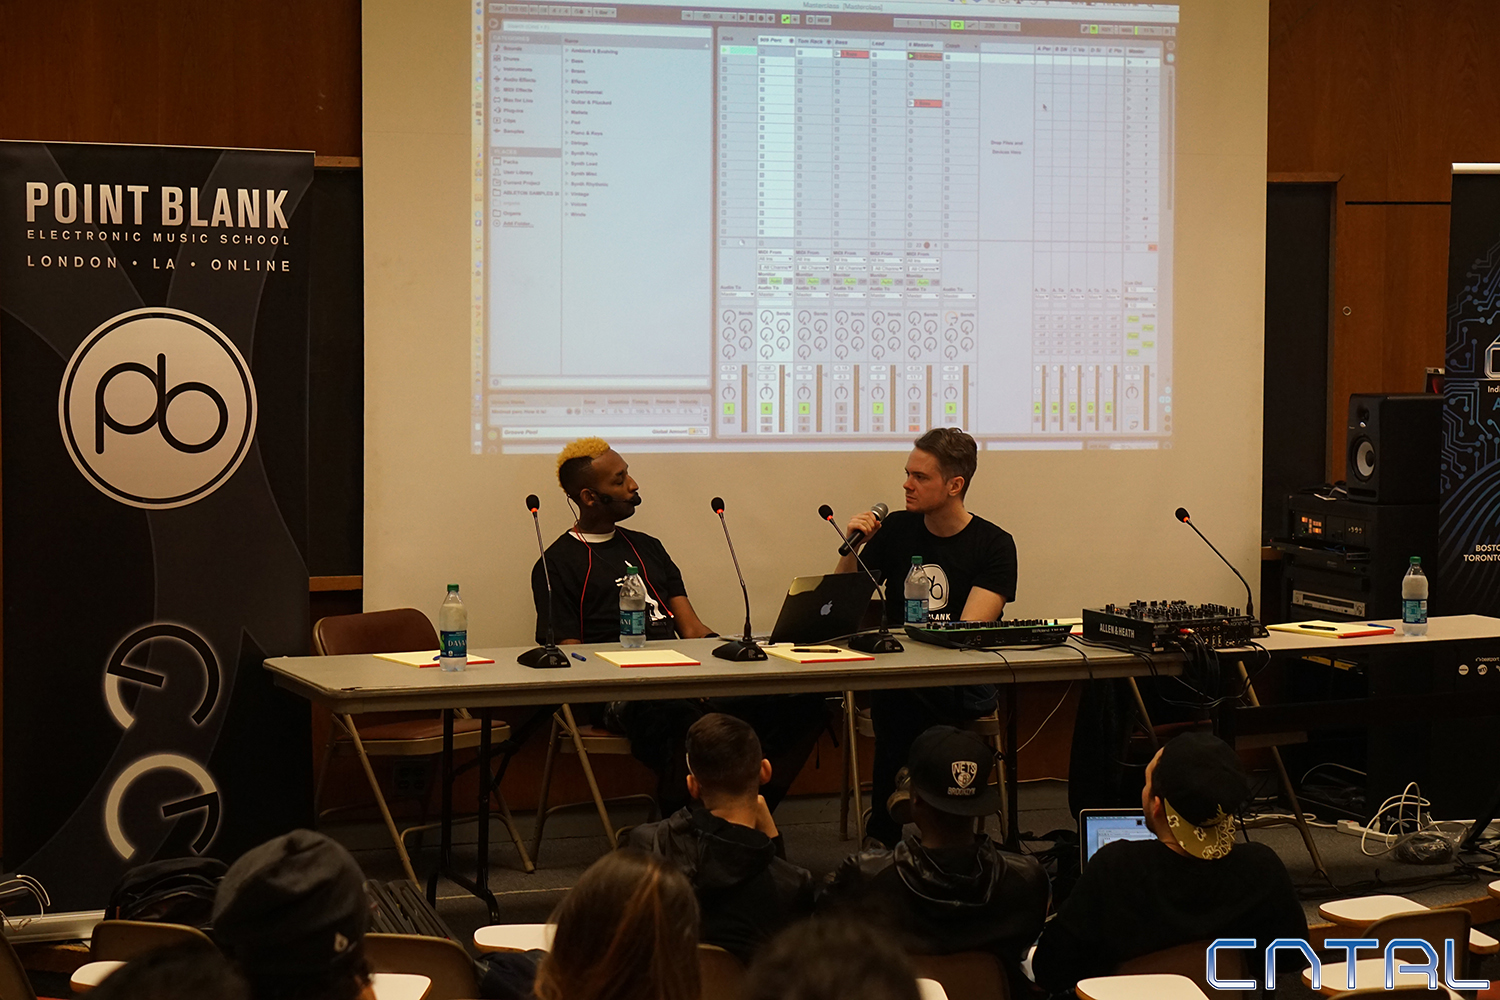 Danitez Saunderson leads a production masterclass hosted by Point Blank.